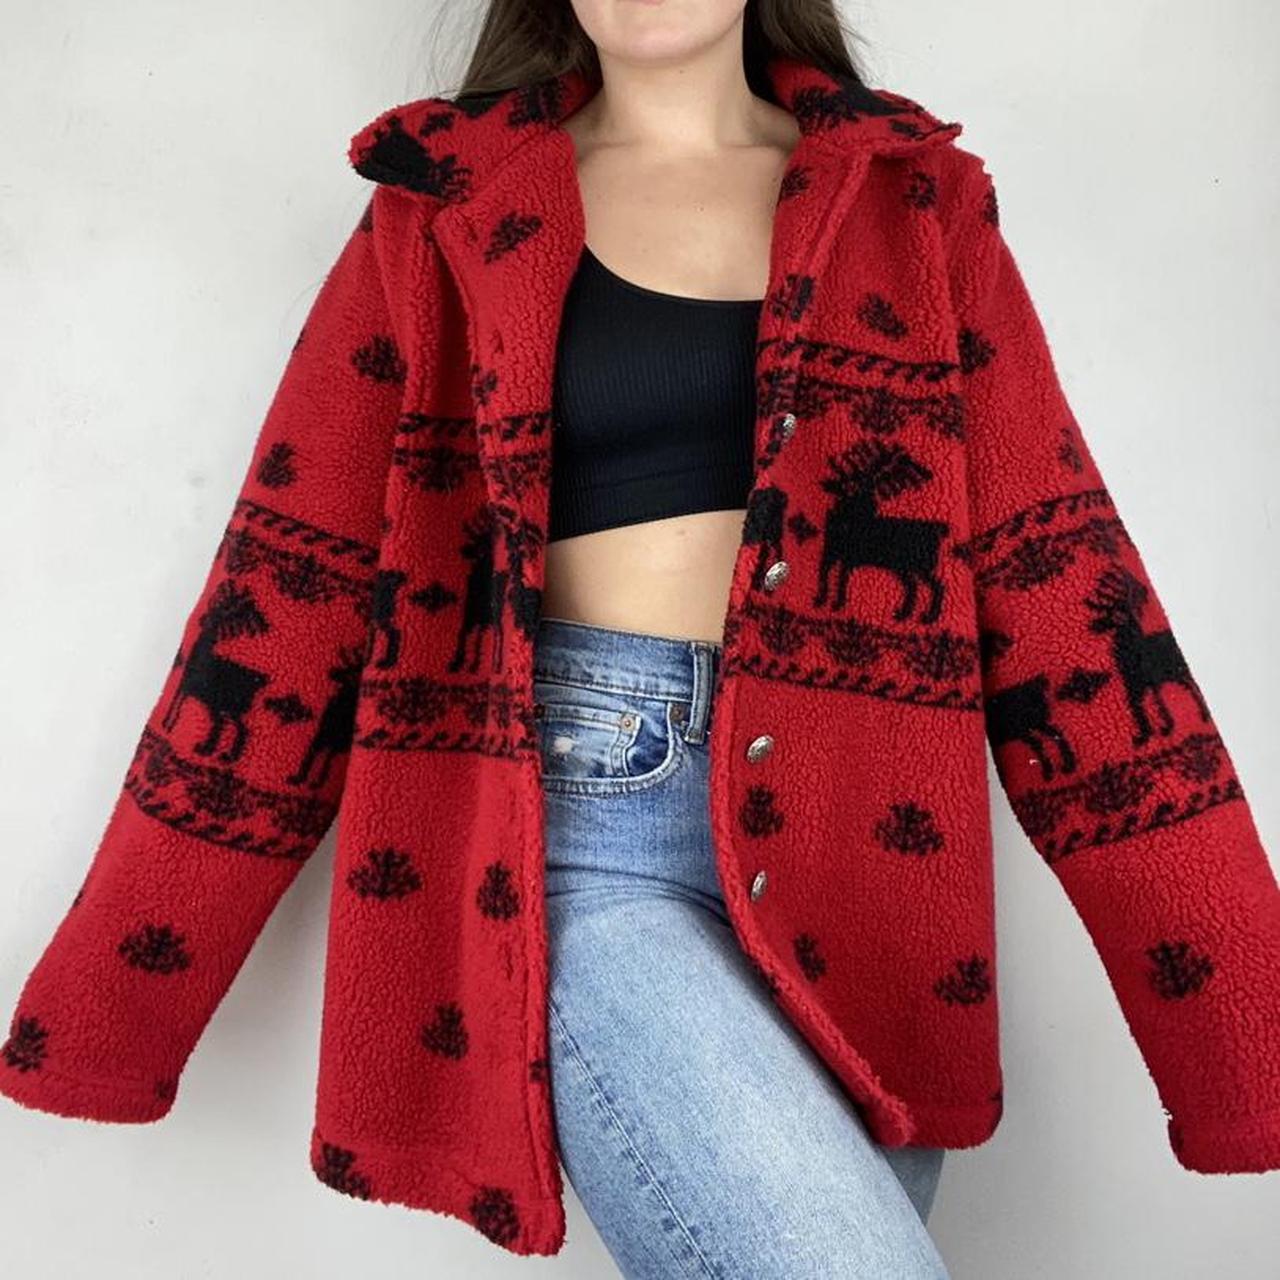 Women's Red and Black Jacket